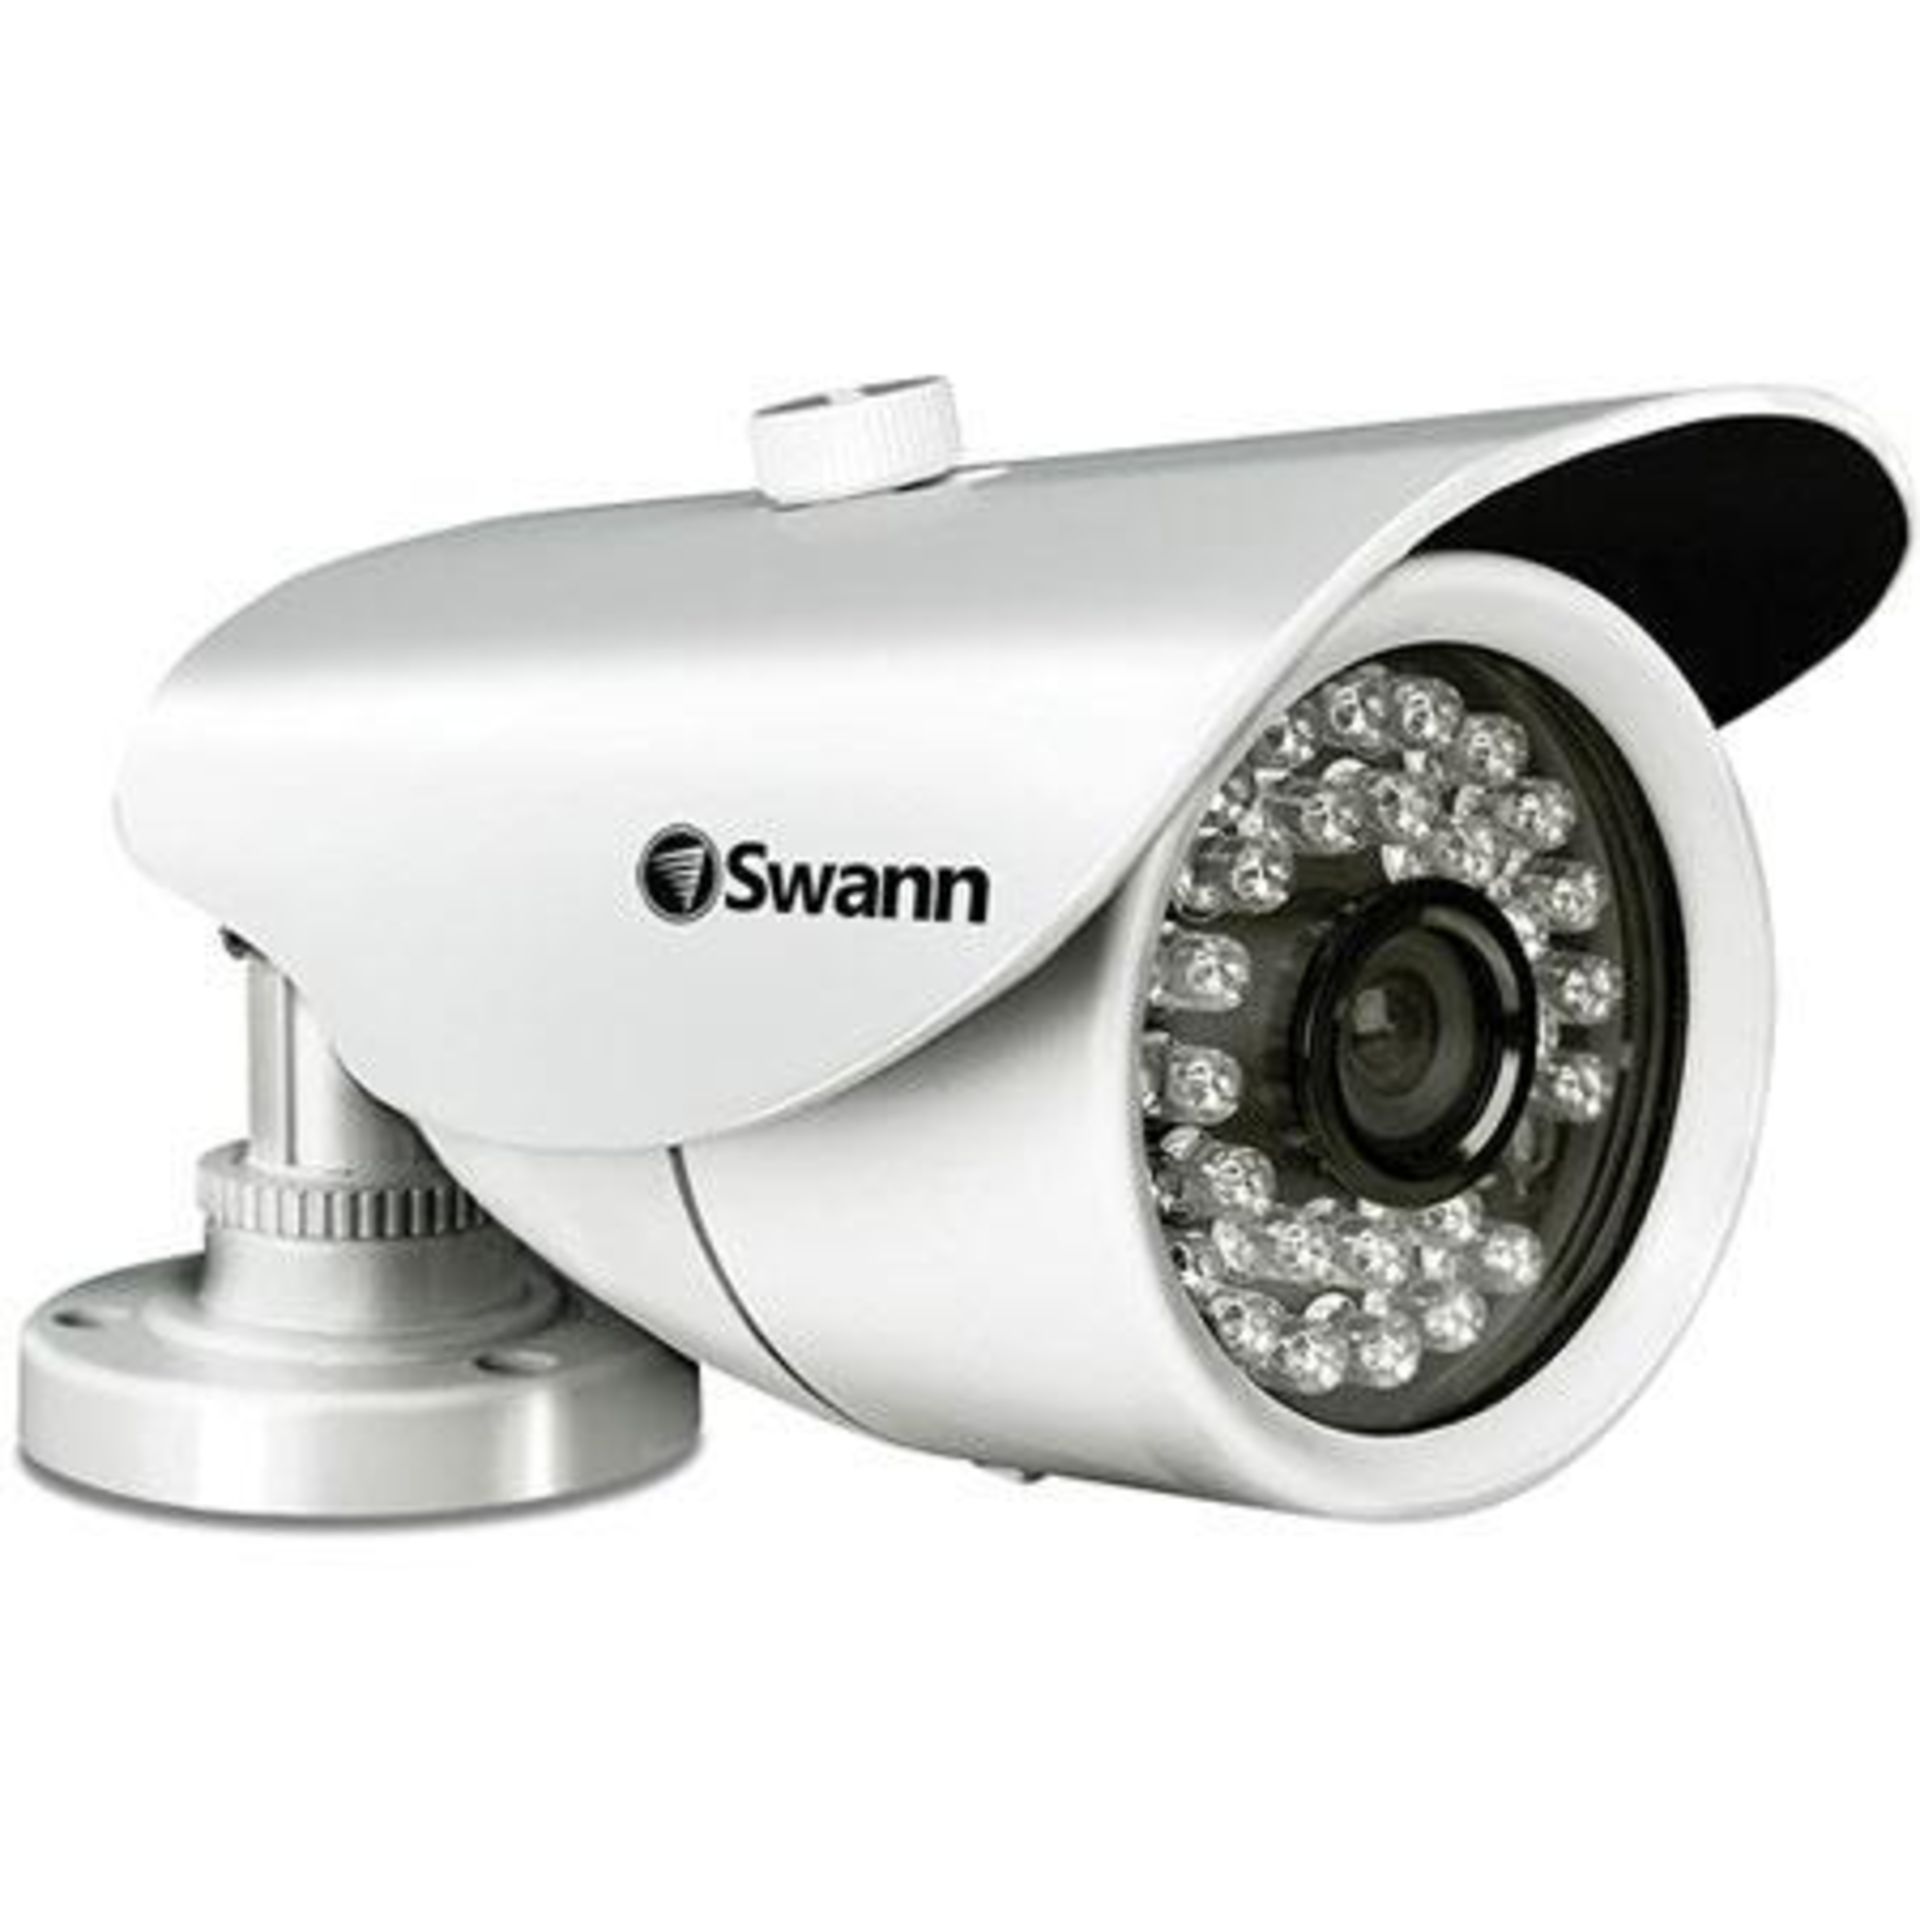 + VAT Grade A Swann Pro-Series Compact 700TVL High Res Professional All-Purpose Security Camera